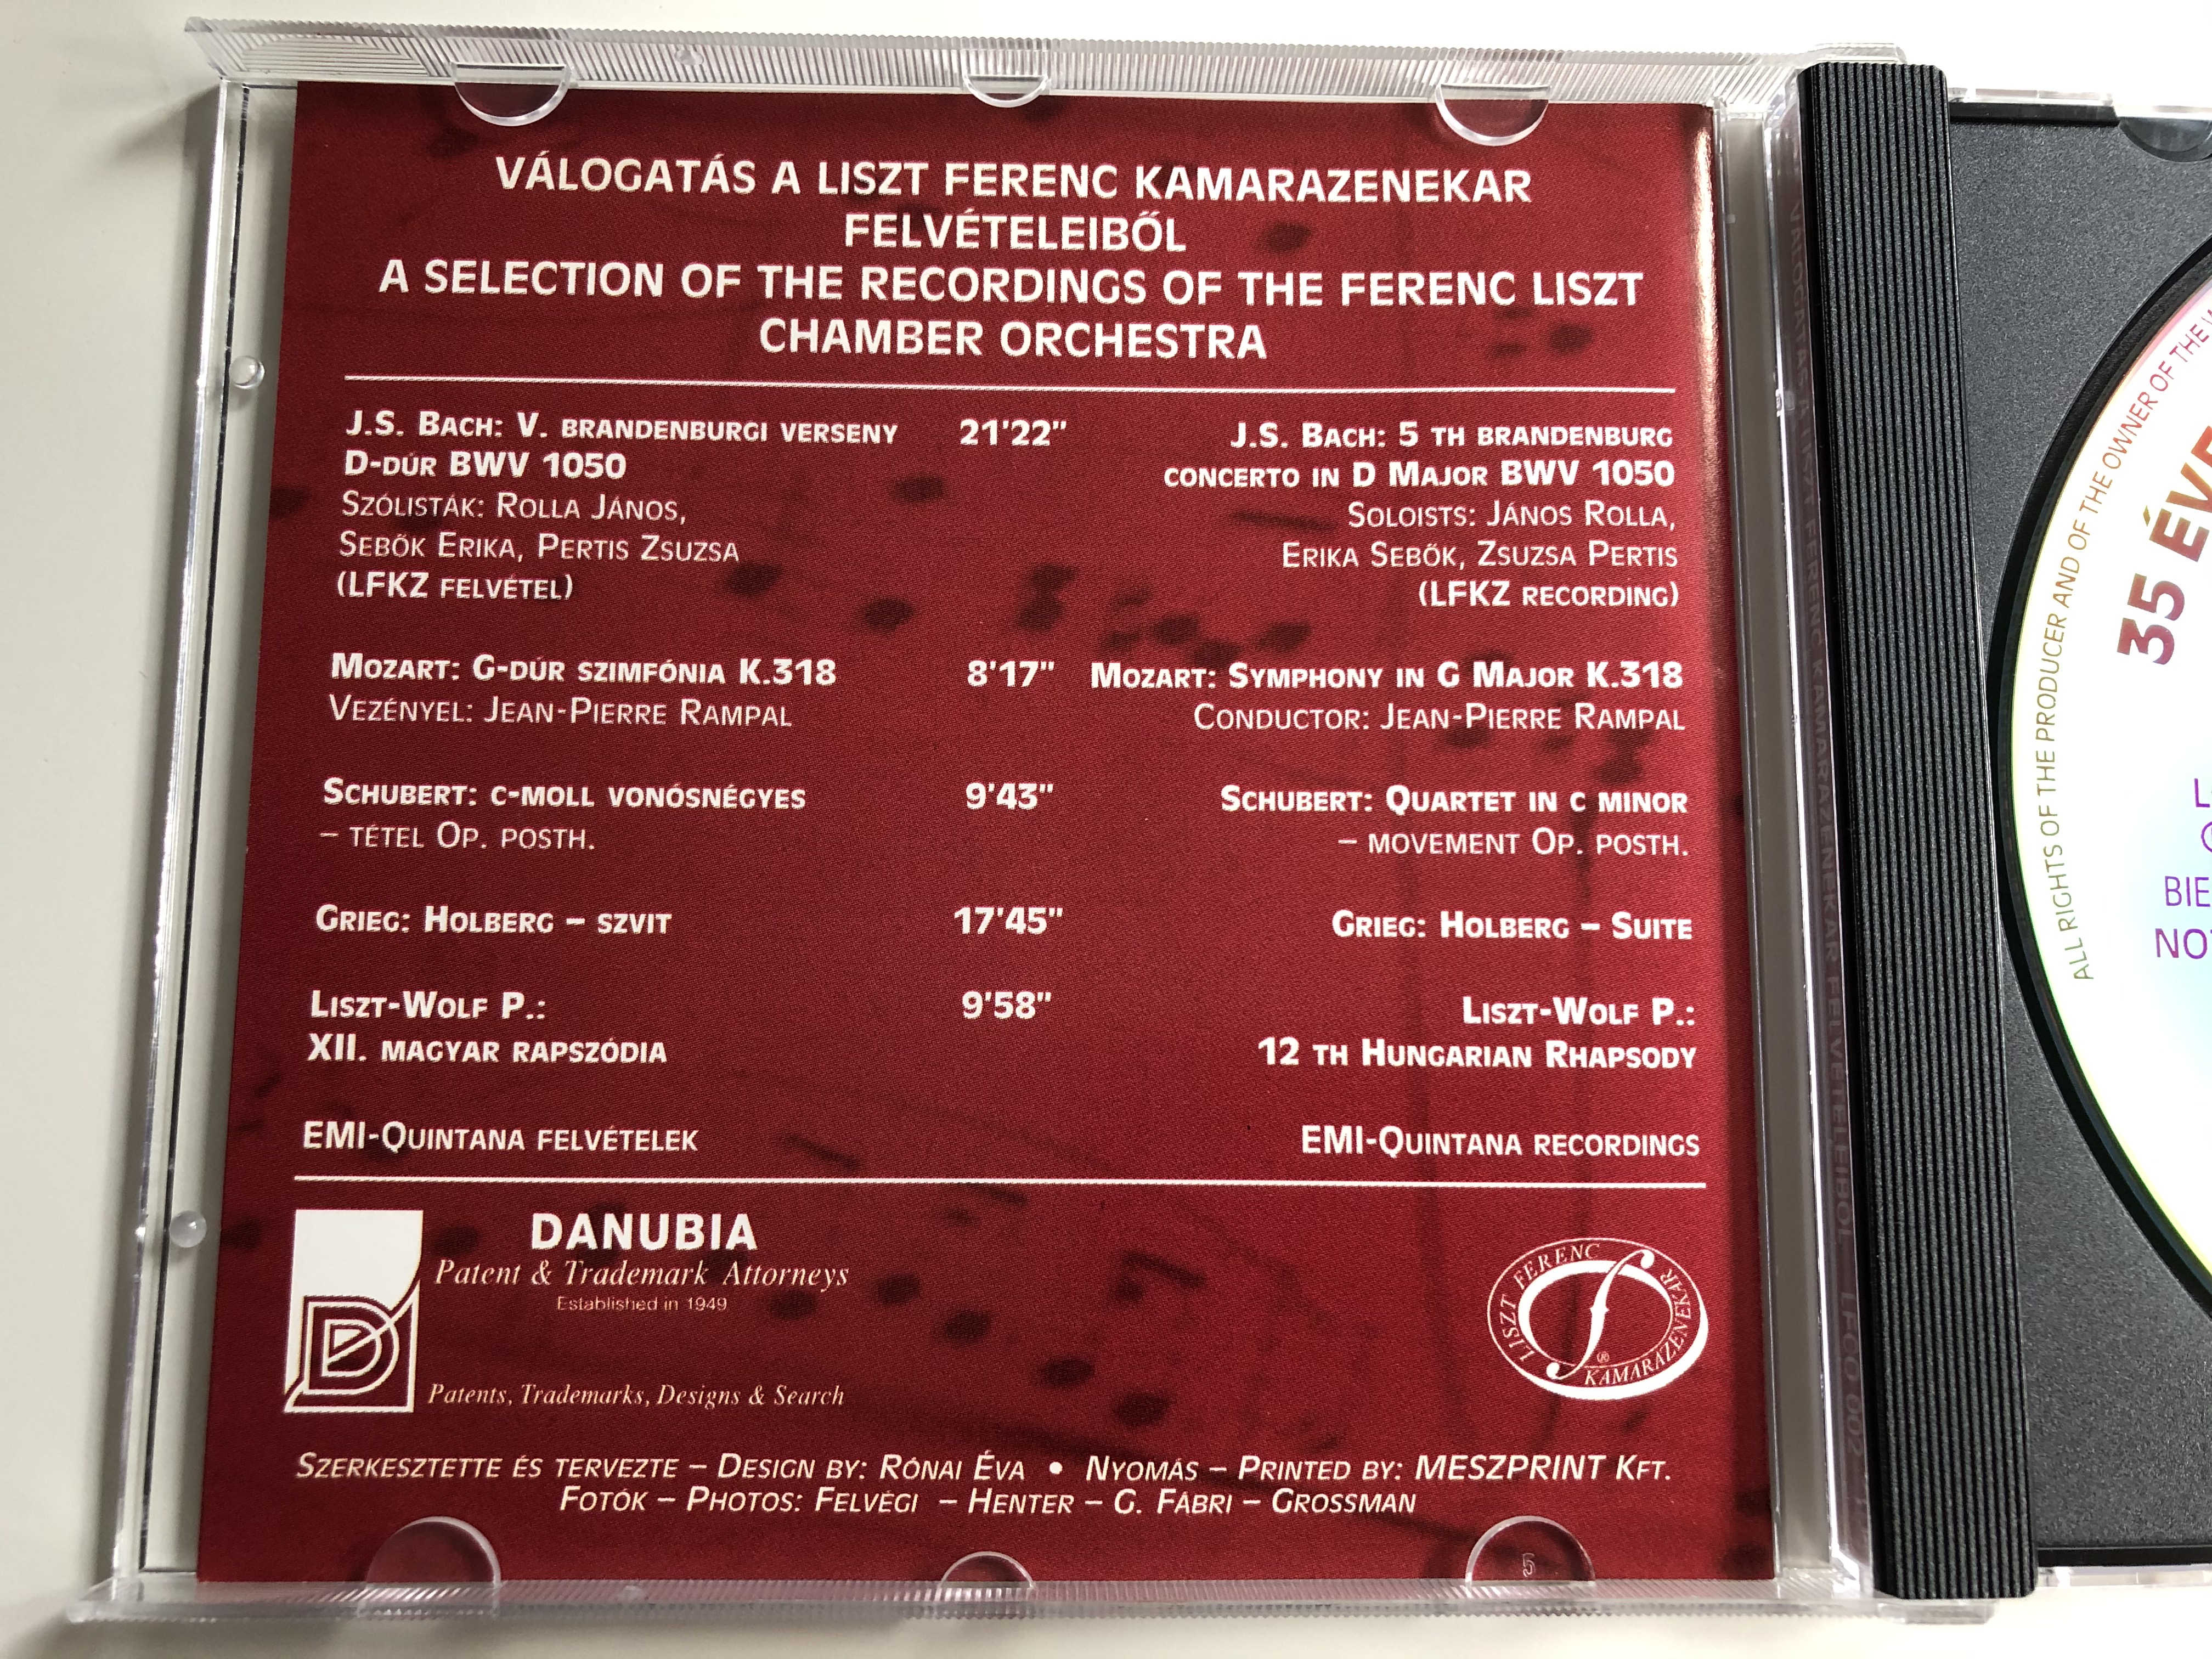 the-ferenc-liszt-chamber-orchestra-is-35-years-old-with-compliments-danubia-patent-and-trademark-attorneys-danubia-audio-cd-1998-lcfo-002-6-.jpg